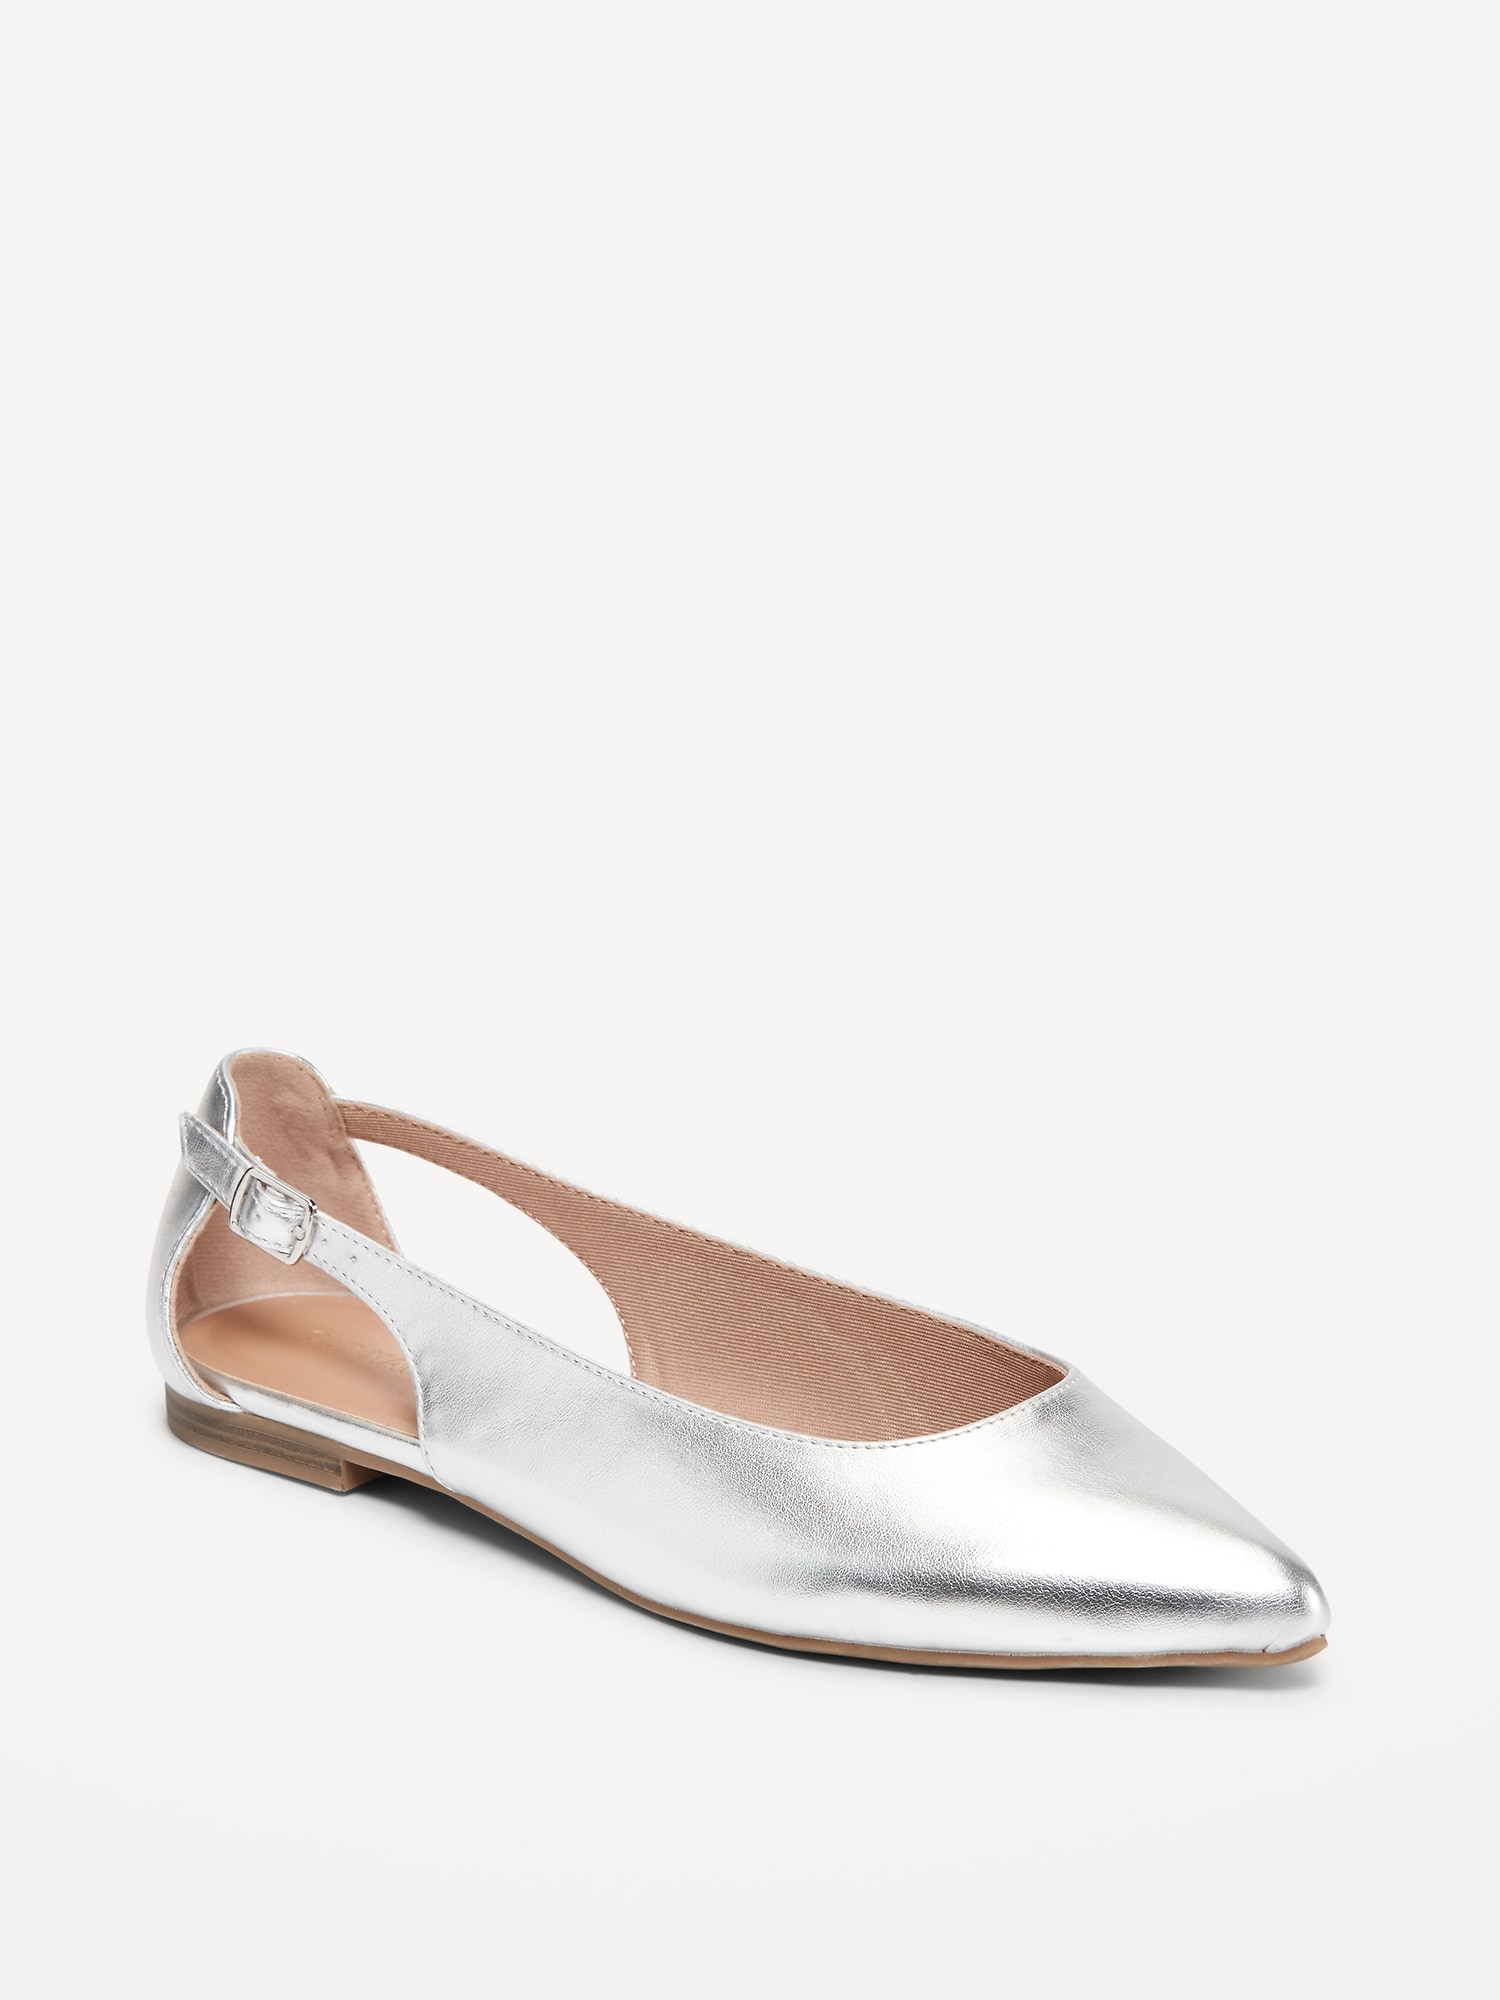 Faux-Leather Slingback Ballet Flat | Old Navy